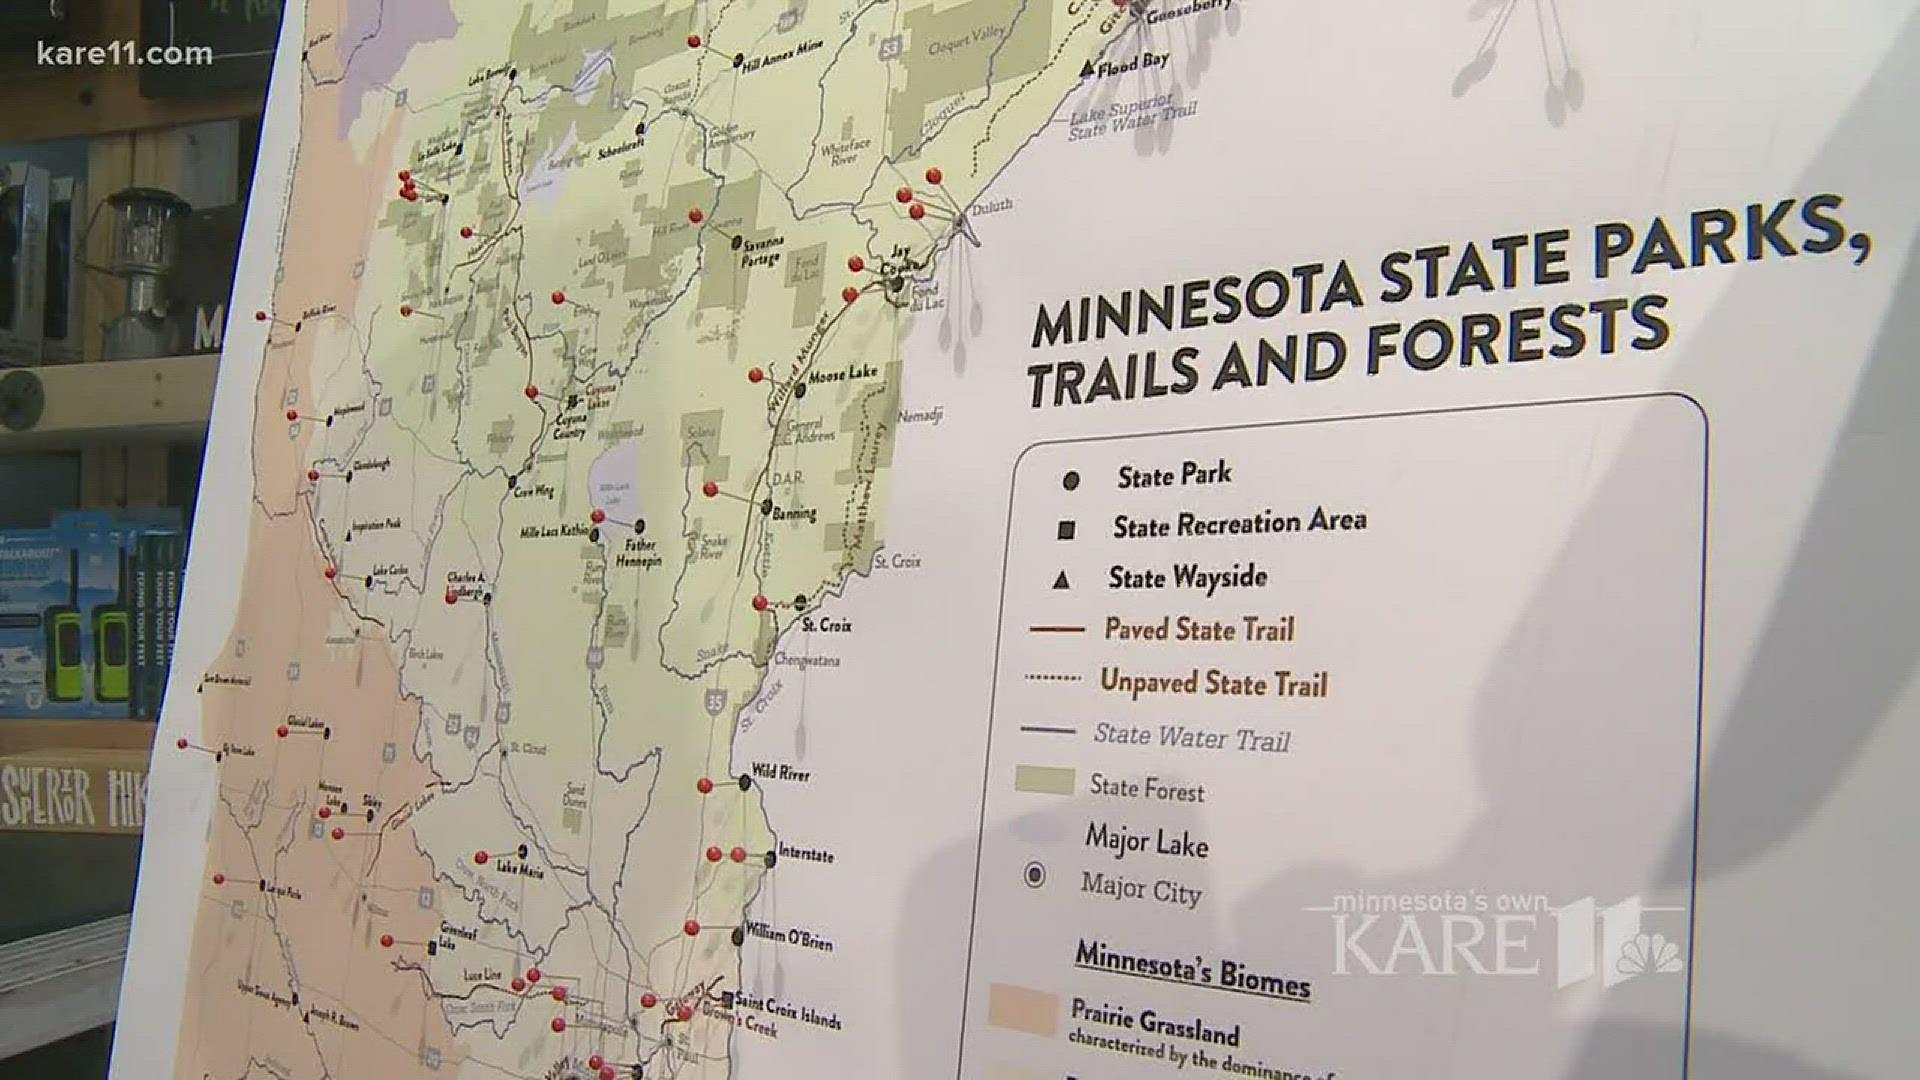 The station was started through a partnership between REI and the DNR with the goal of getting more Minnesotans outdoors. https://kare11.tv/2EB93jq